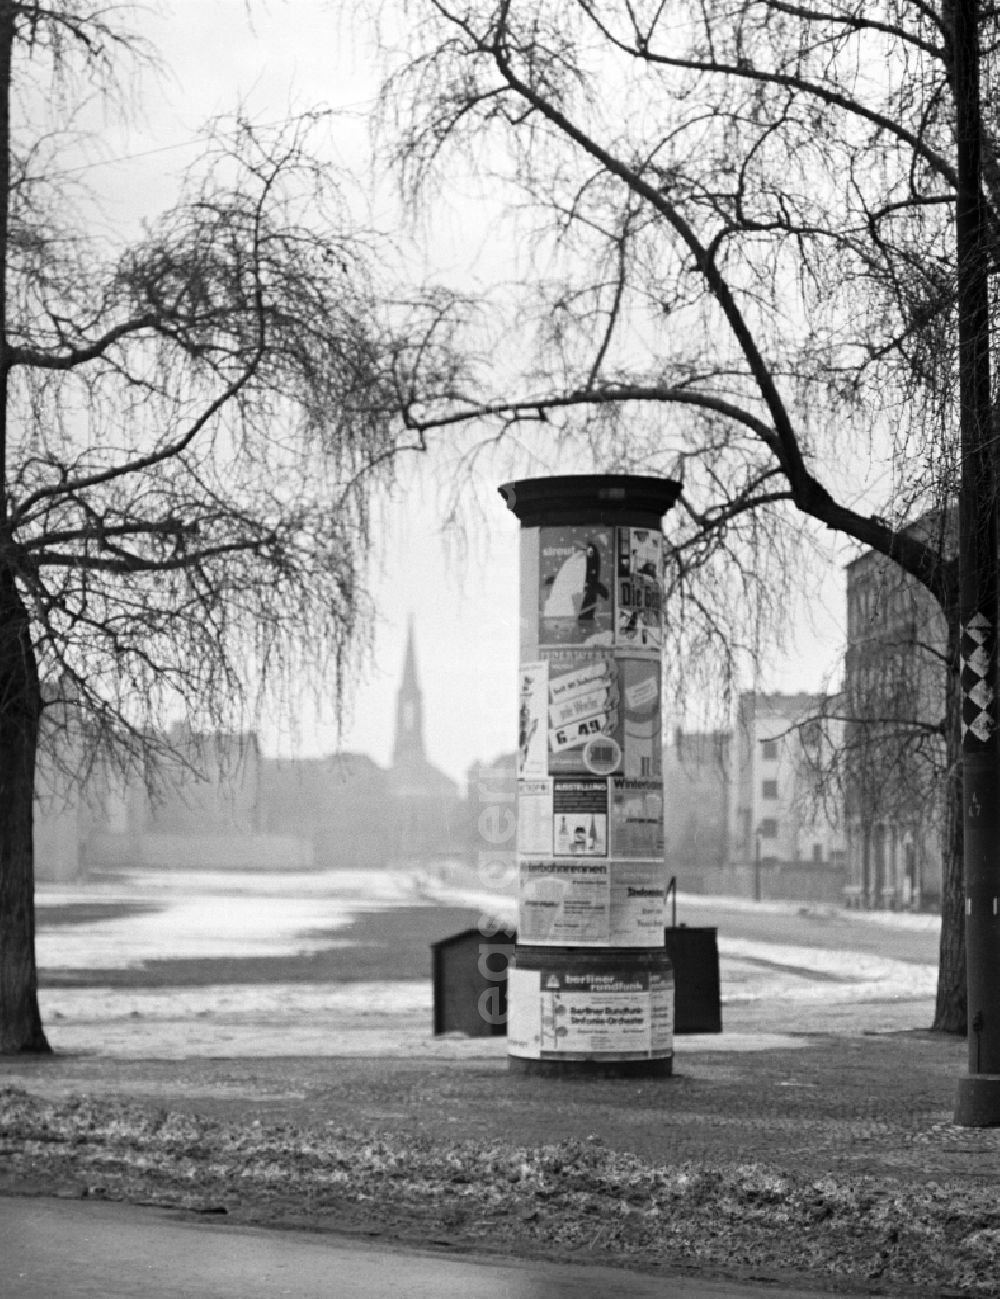 GDR image archive: Berlin - Prenzlauer Berg - A pasted Litfaßsäule in Berlin - Prenzlauer Berg. An advertising column is a column stop, are glued to the posters. It was invented by Ernst Berliner printer Litfaß and belongs to the field of outdoor advertising